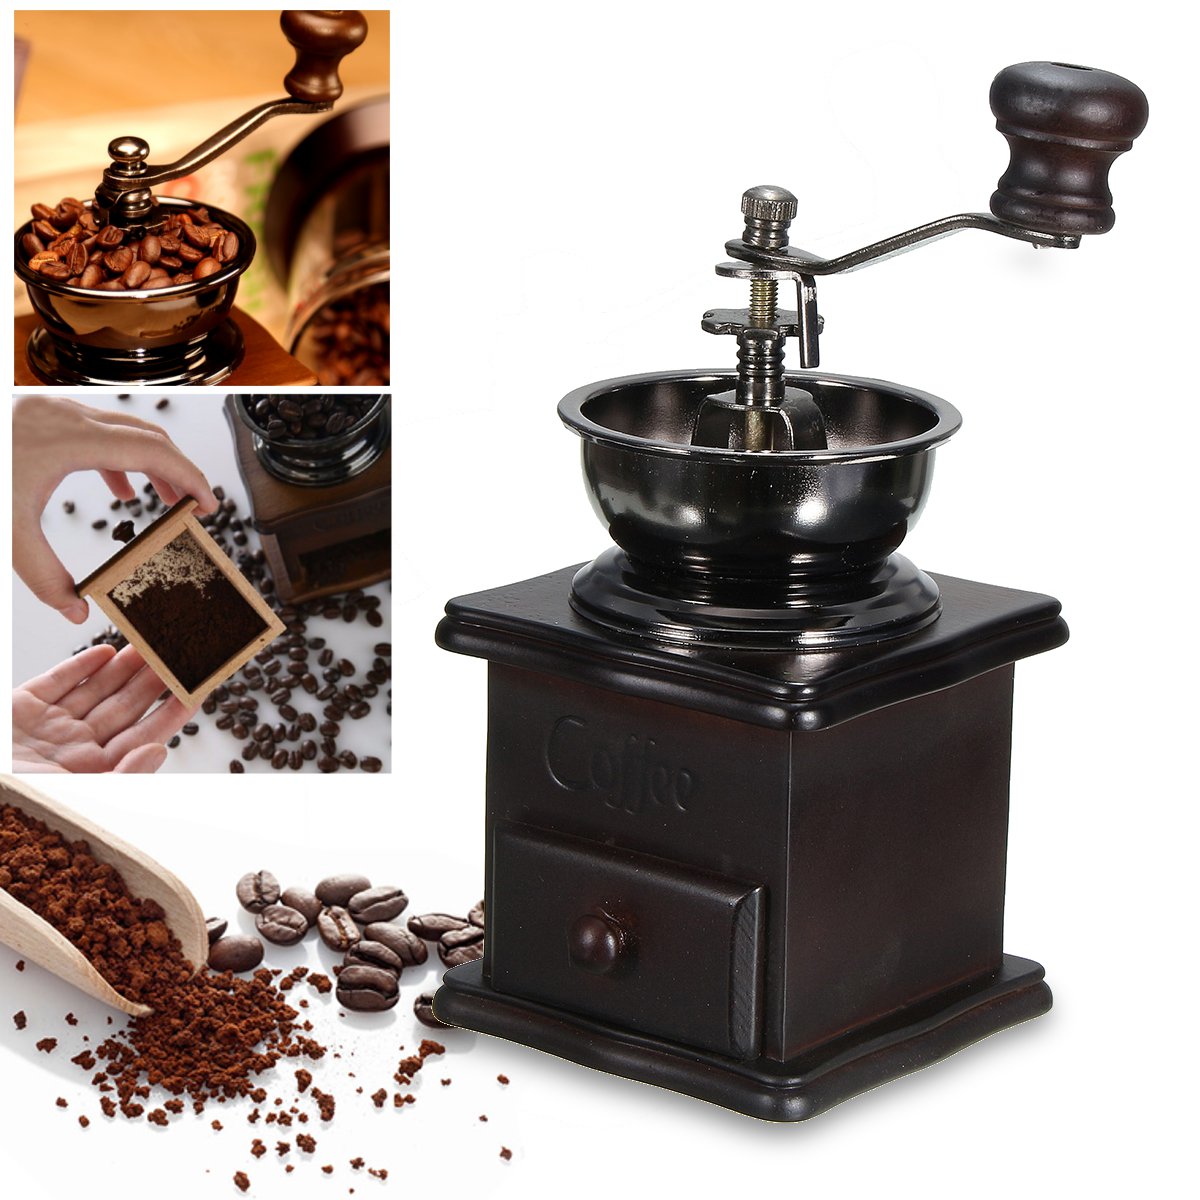 Manual-Coffee-Bean-Grinder-Spice-Herbs-Vintage-Retro-Hand-Grinding-Tool-Wooden-Burr-Mill-1352655